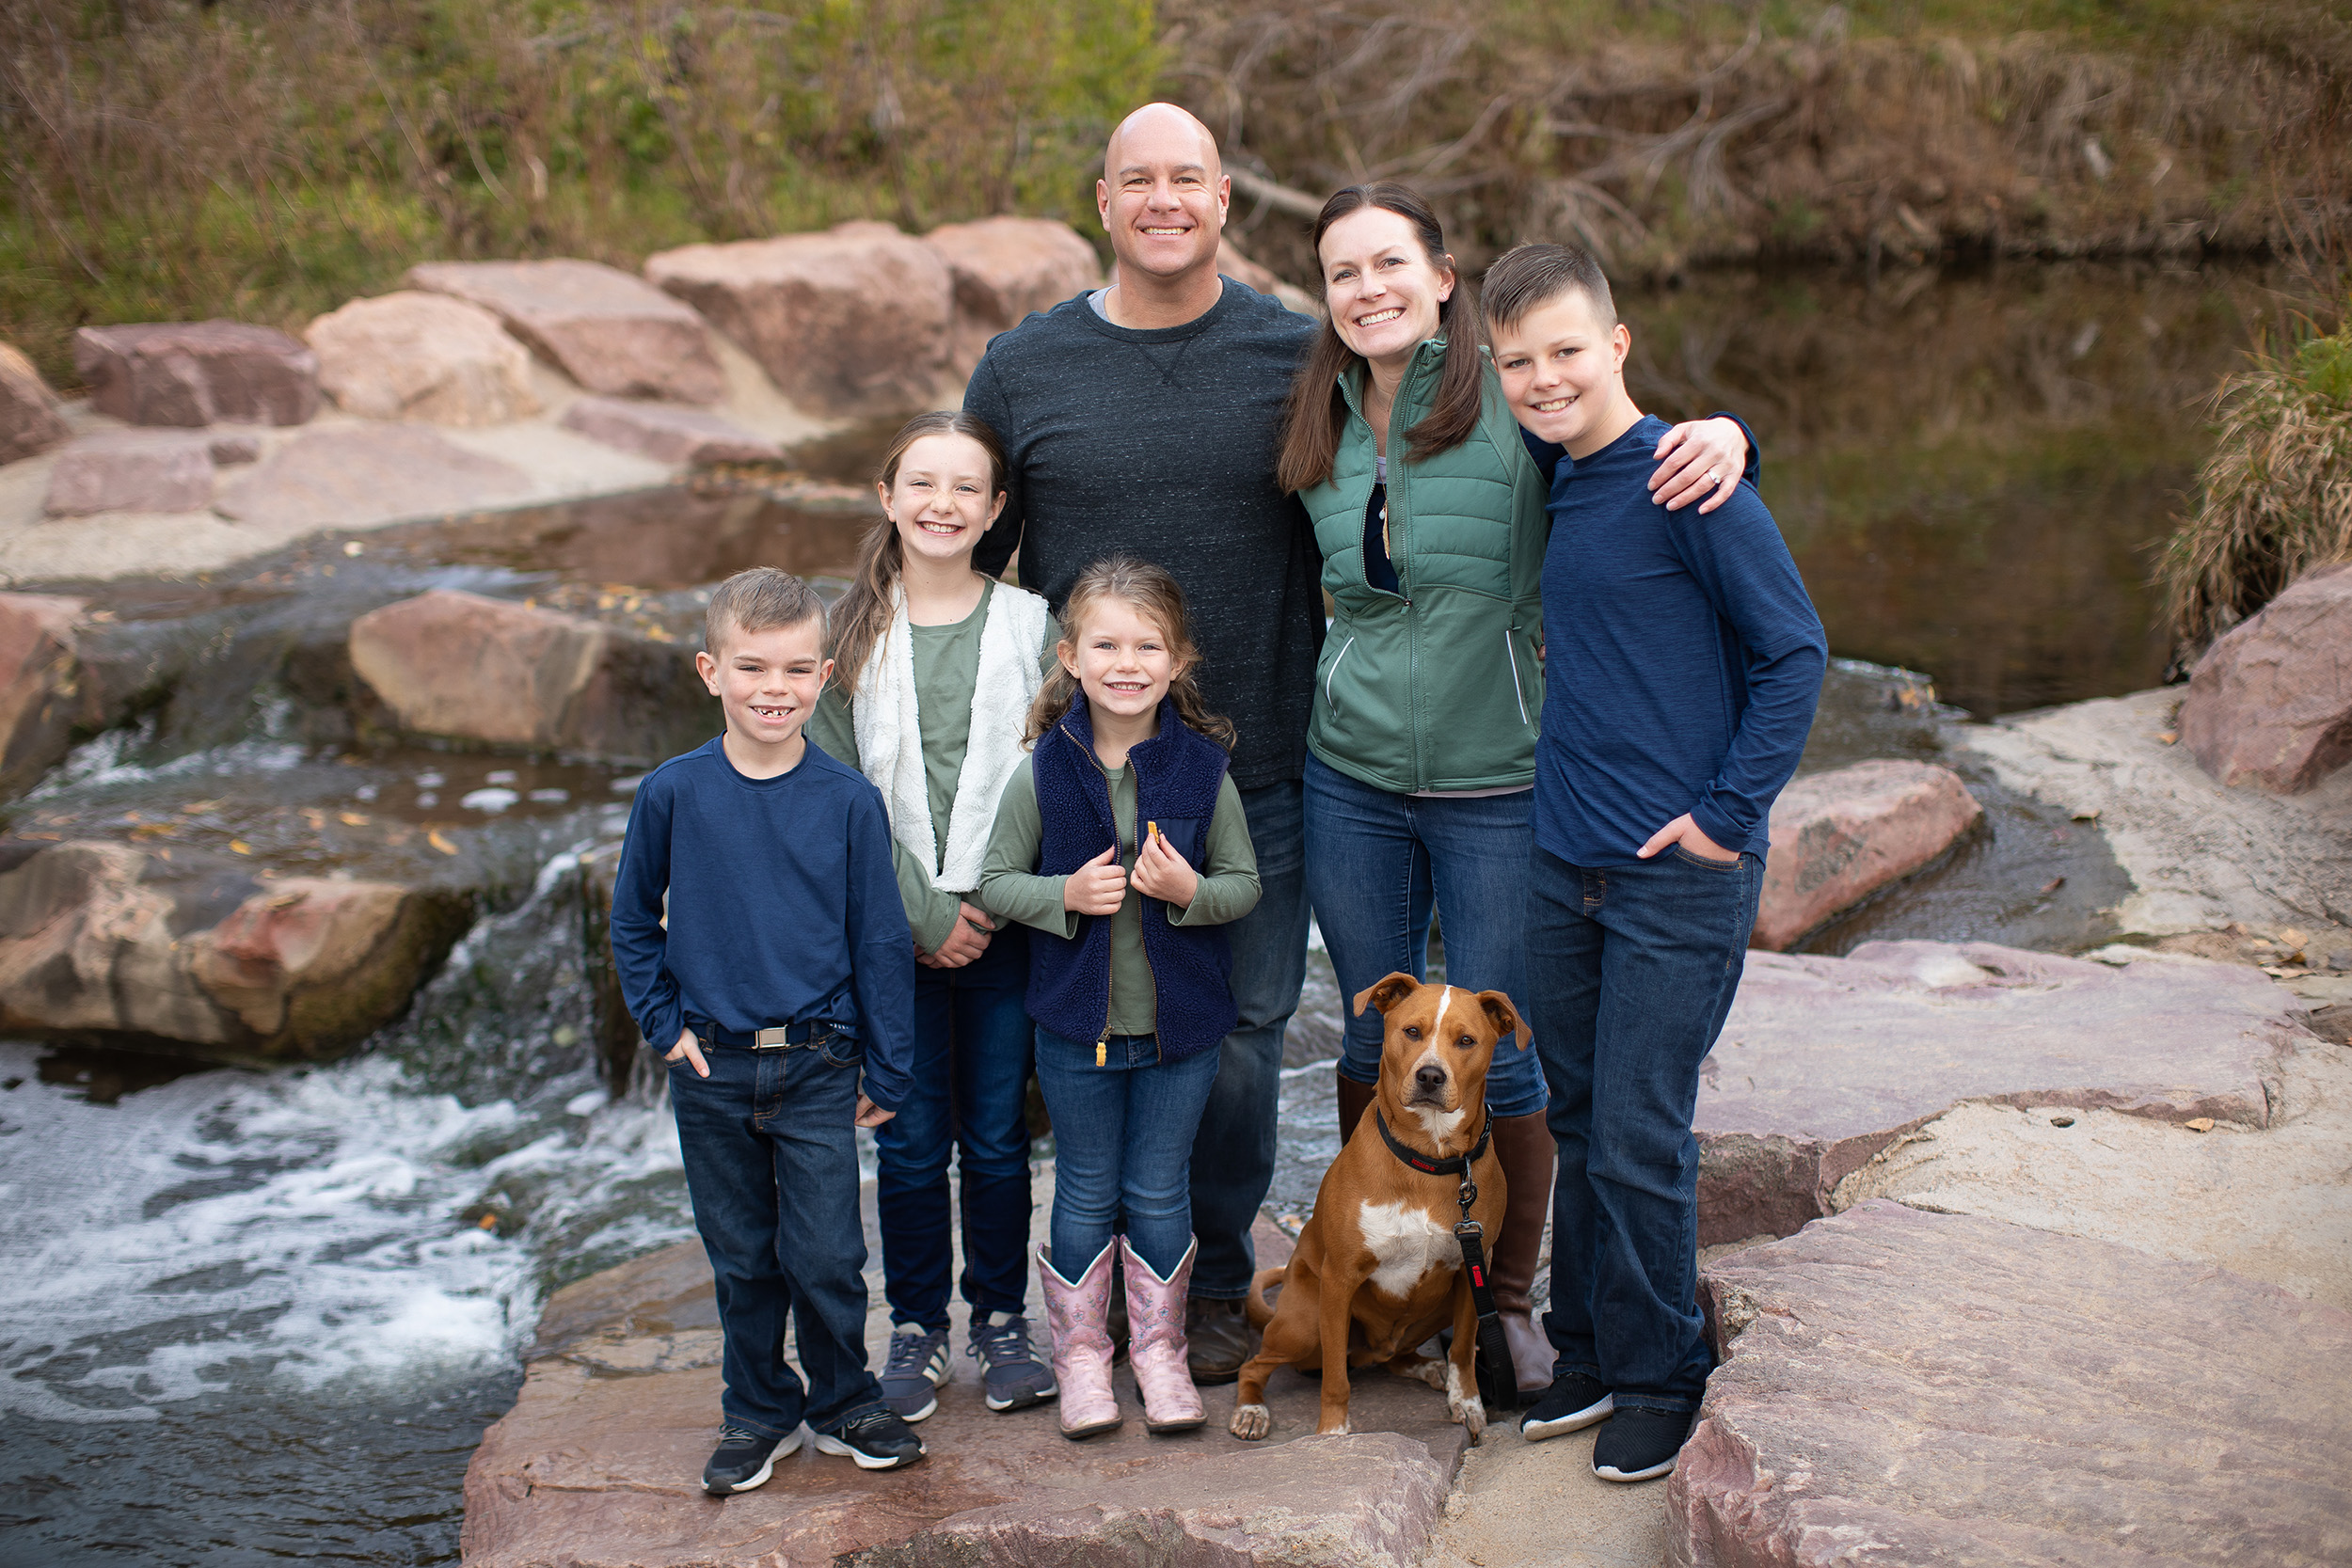 Katie Creviston, RN, a Marquette Method Instructor, with her family in Colorado